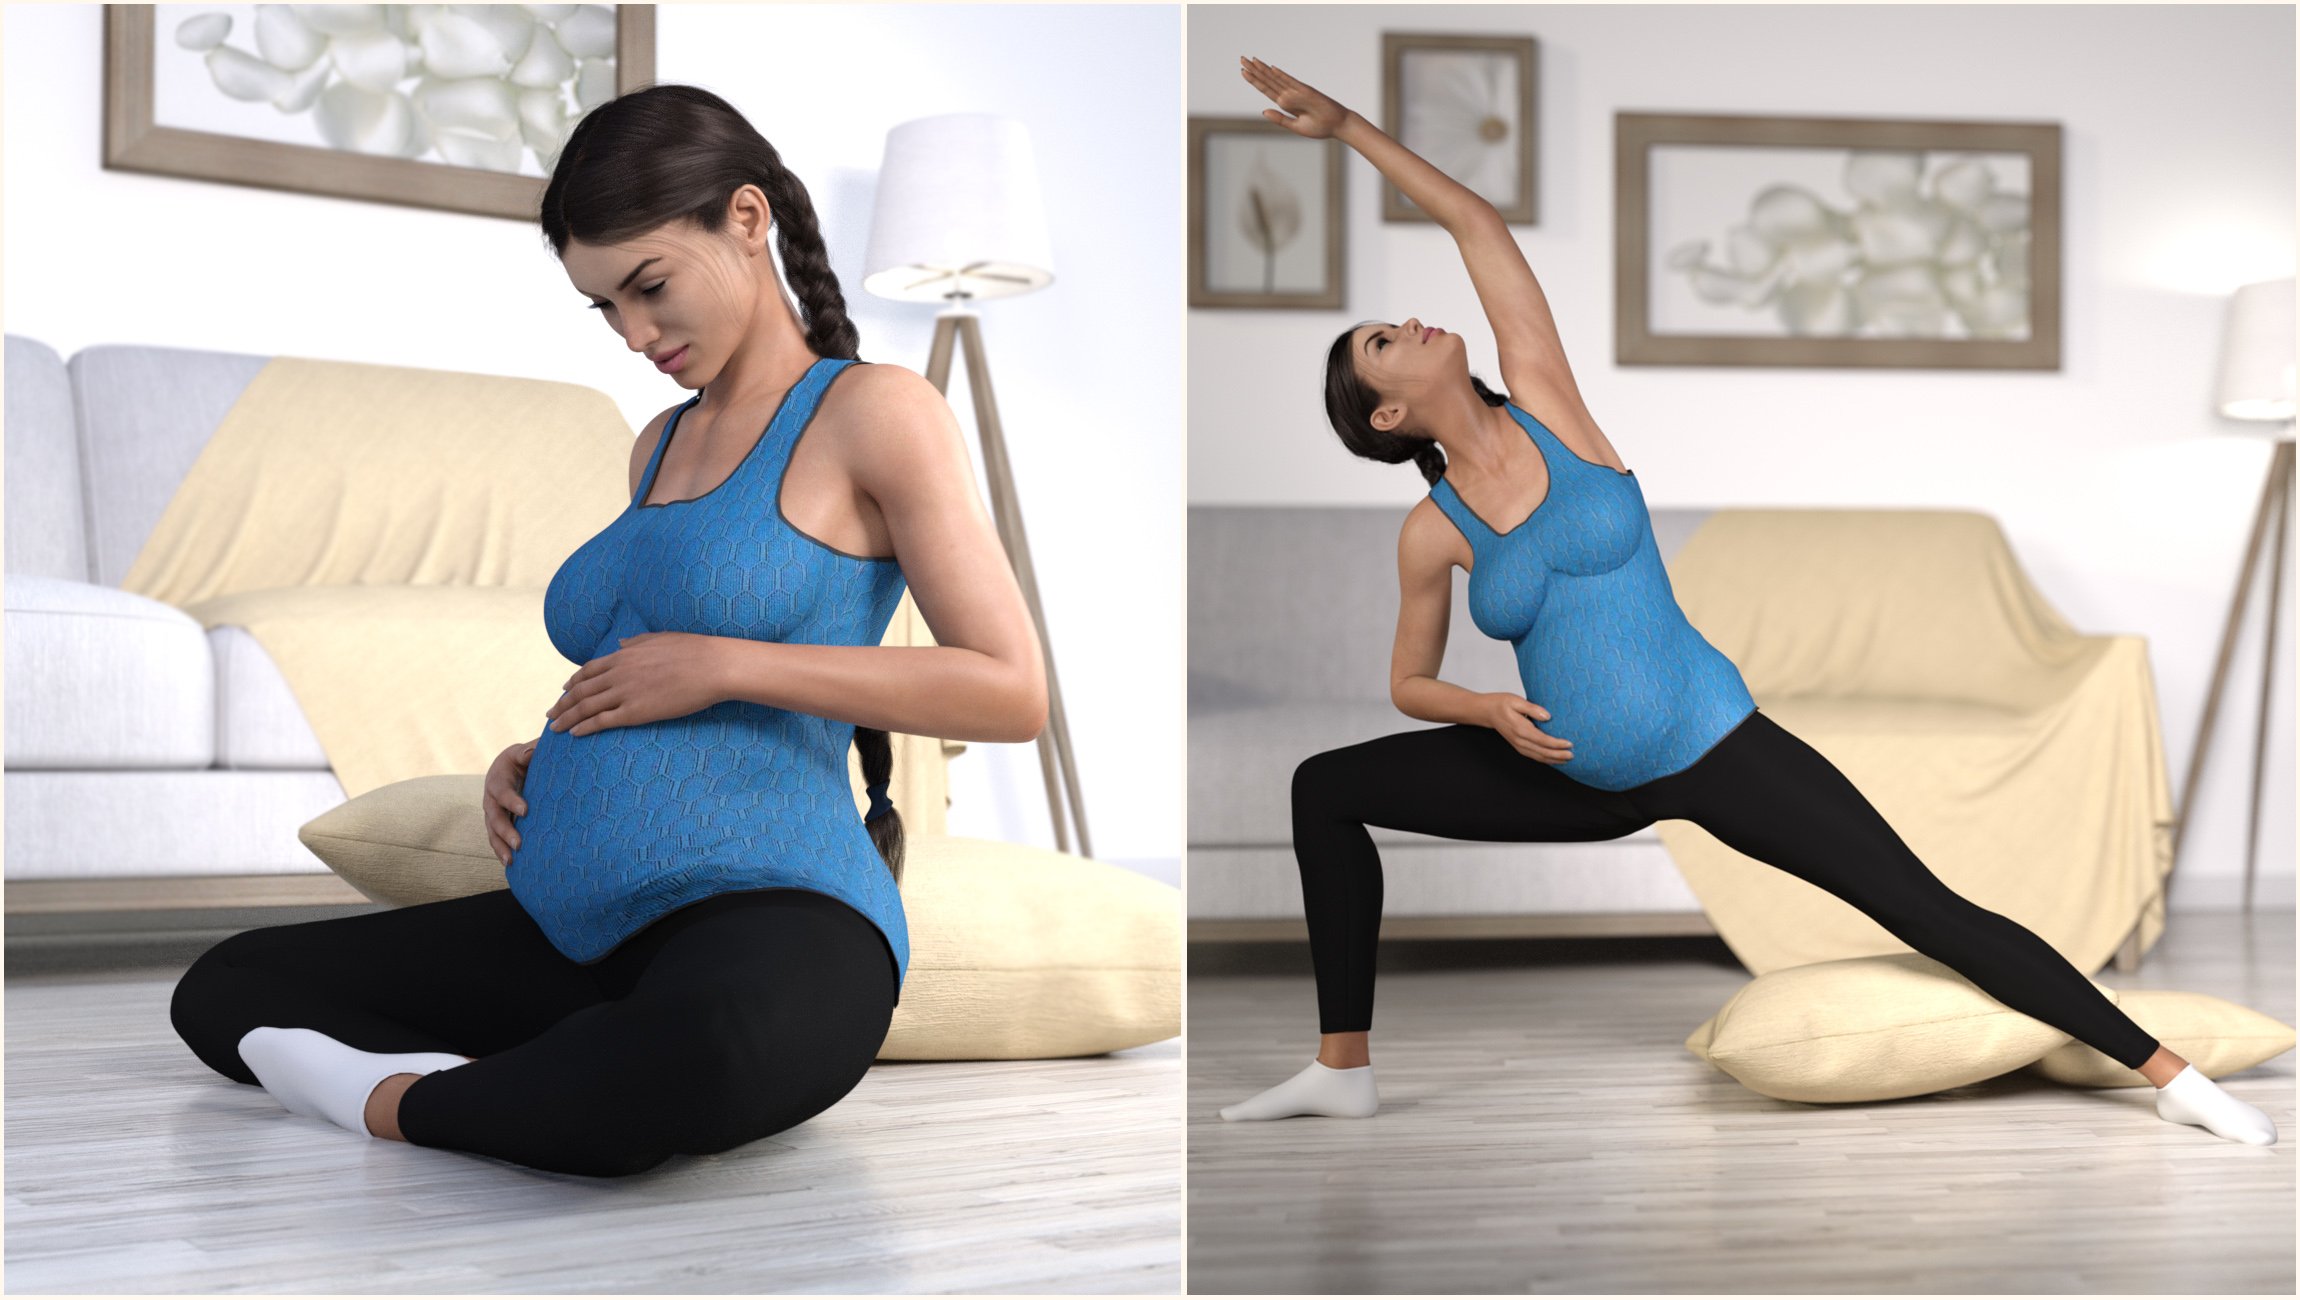 Z Expecting - Pregnancy Preset and Poses for Genesis 3 and 8 by: Zeddicuss, 3D Models by Daz 3D